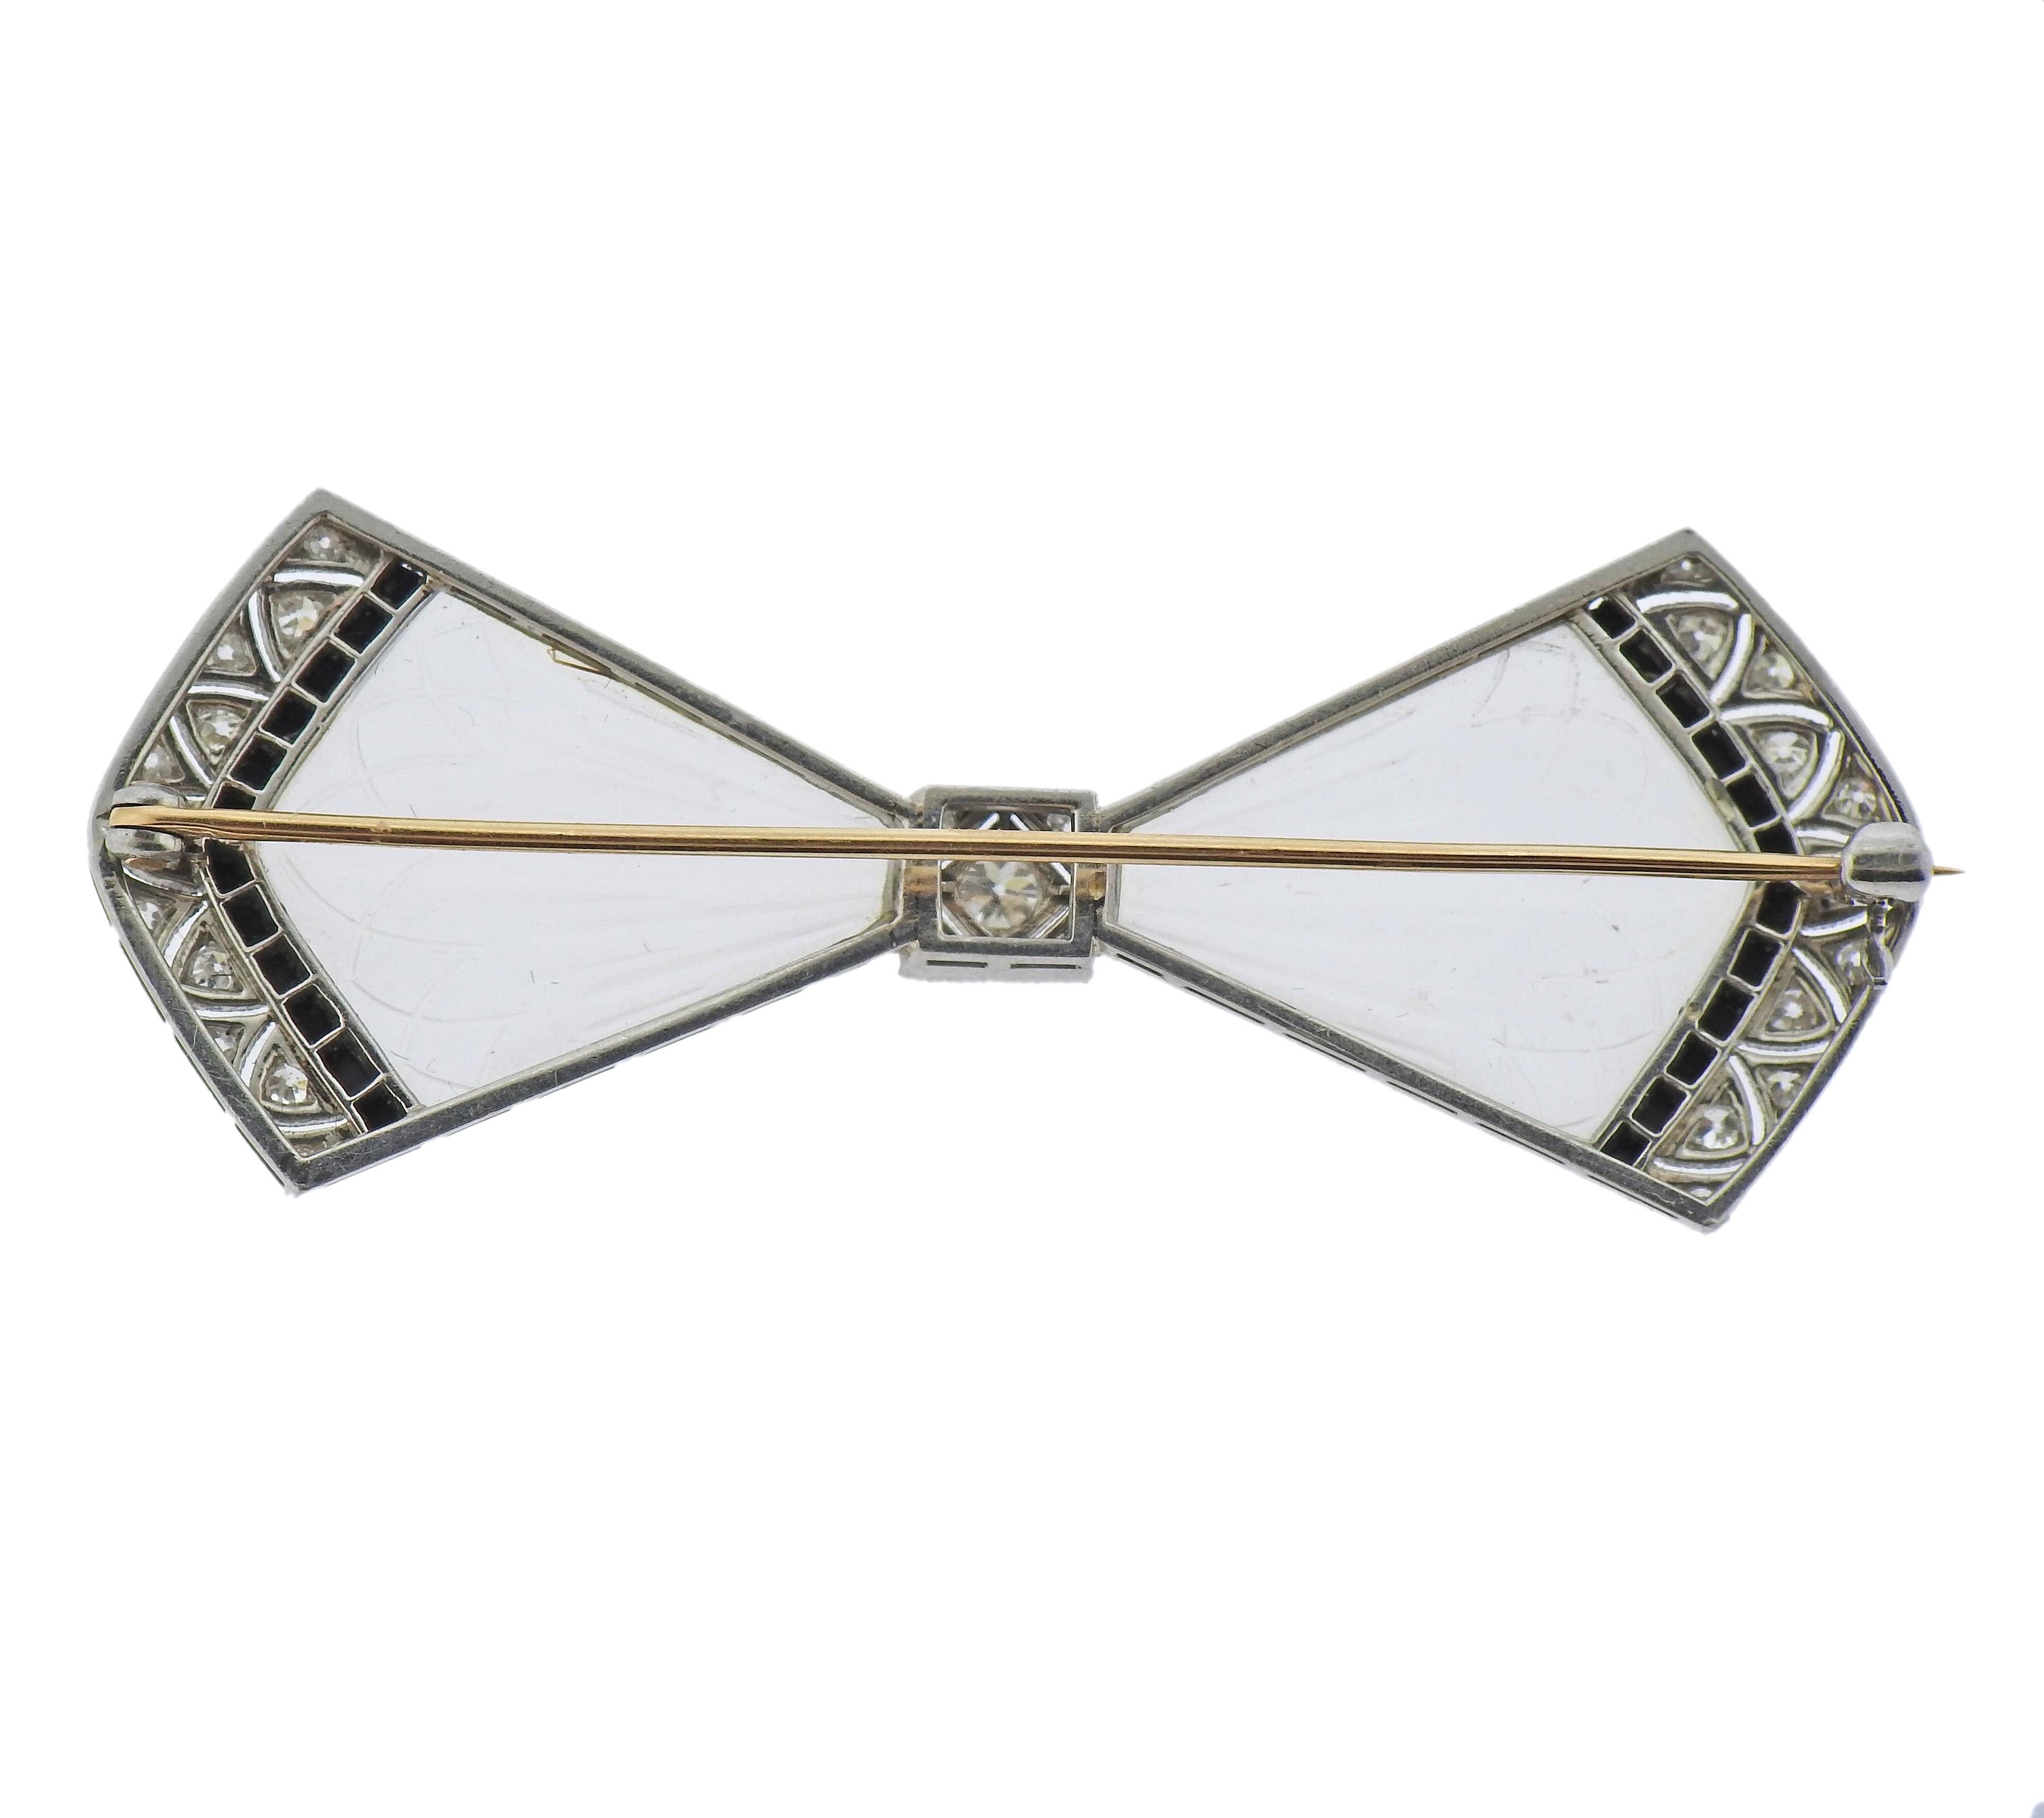 Art Deco platinum top and 14k gold hardware bow brooch, adorned with carved frosted crystal, onyx accents and approx. 0.44ctw in diamonds. Brooch measures 2 3/8